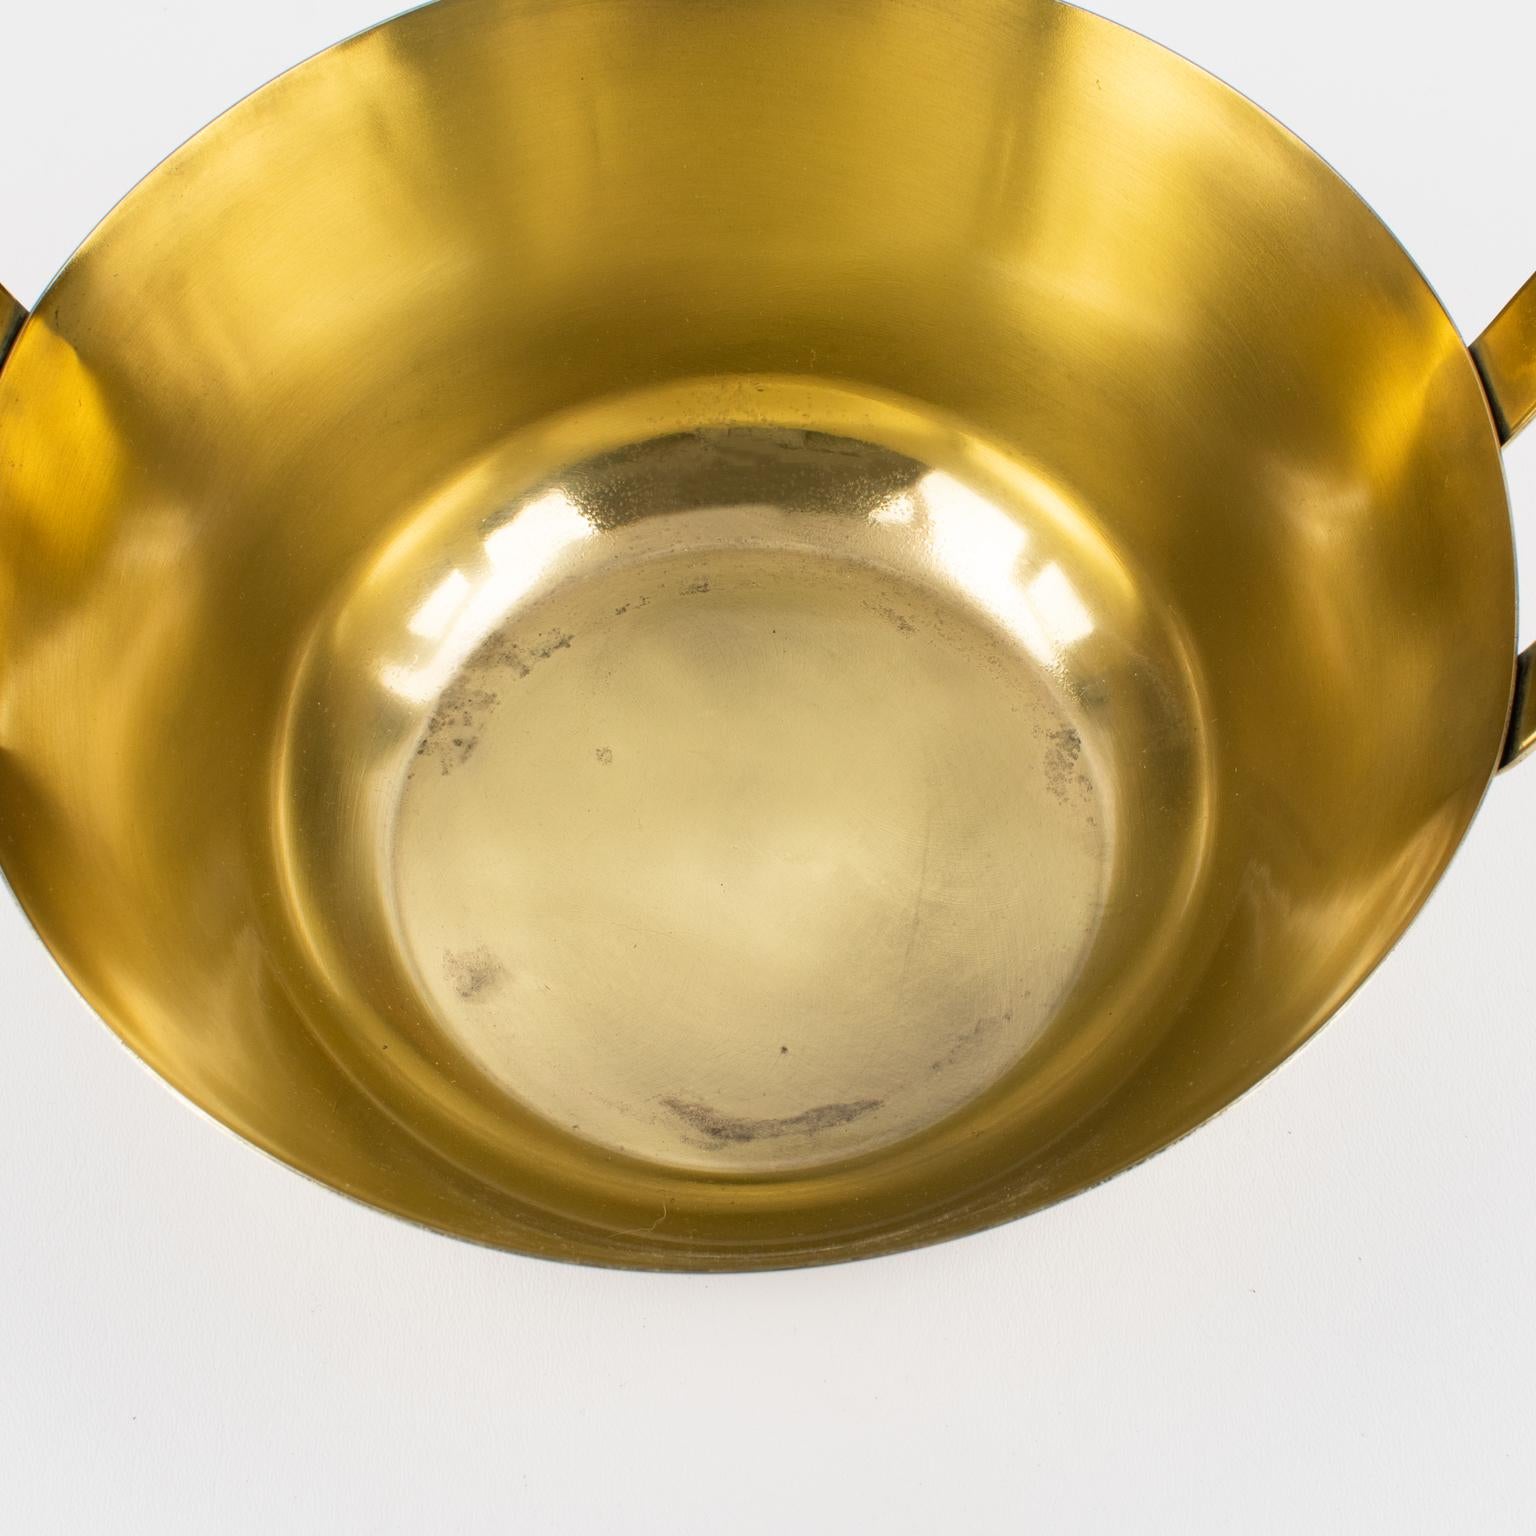 Modernist Gilt Metal and Glass Decorative Bowl Centerpiece, 1980s For Sale 1